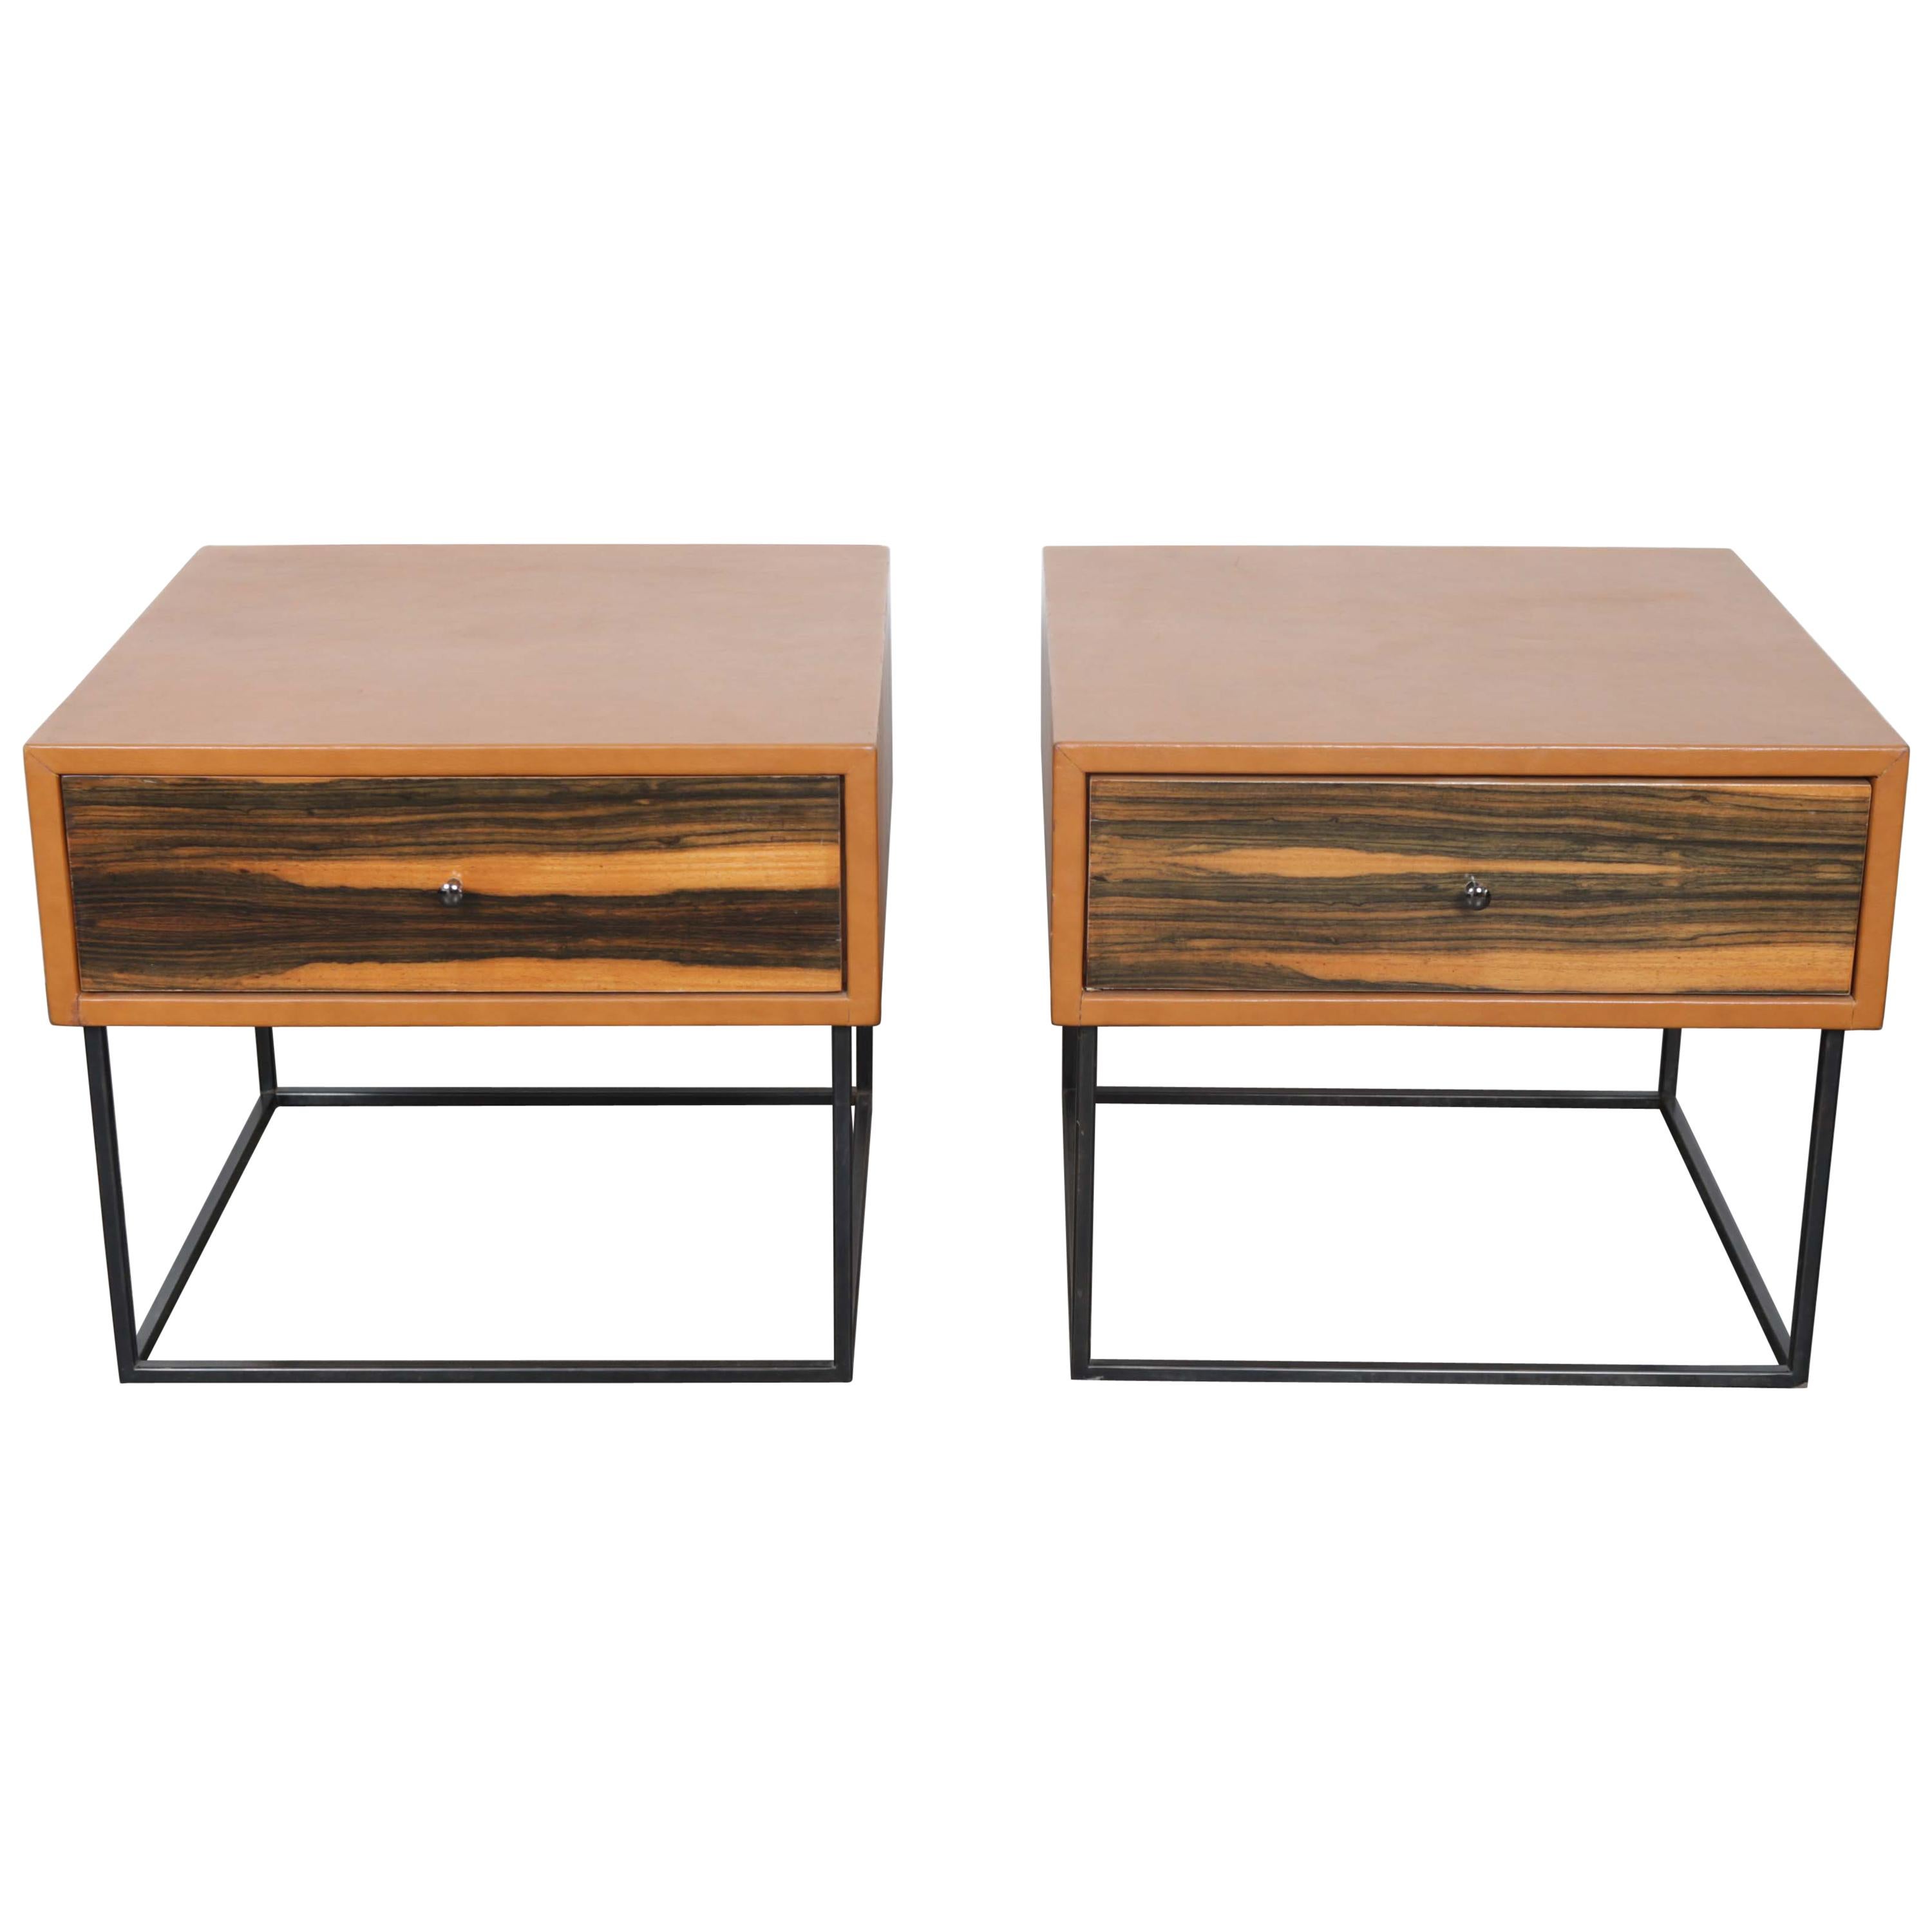 1960s Brazilian Leather Wrapped End Tables with Rosewood Drawer Fronts For Sale